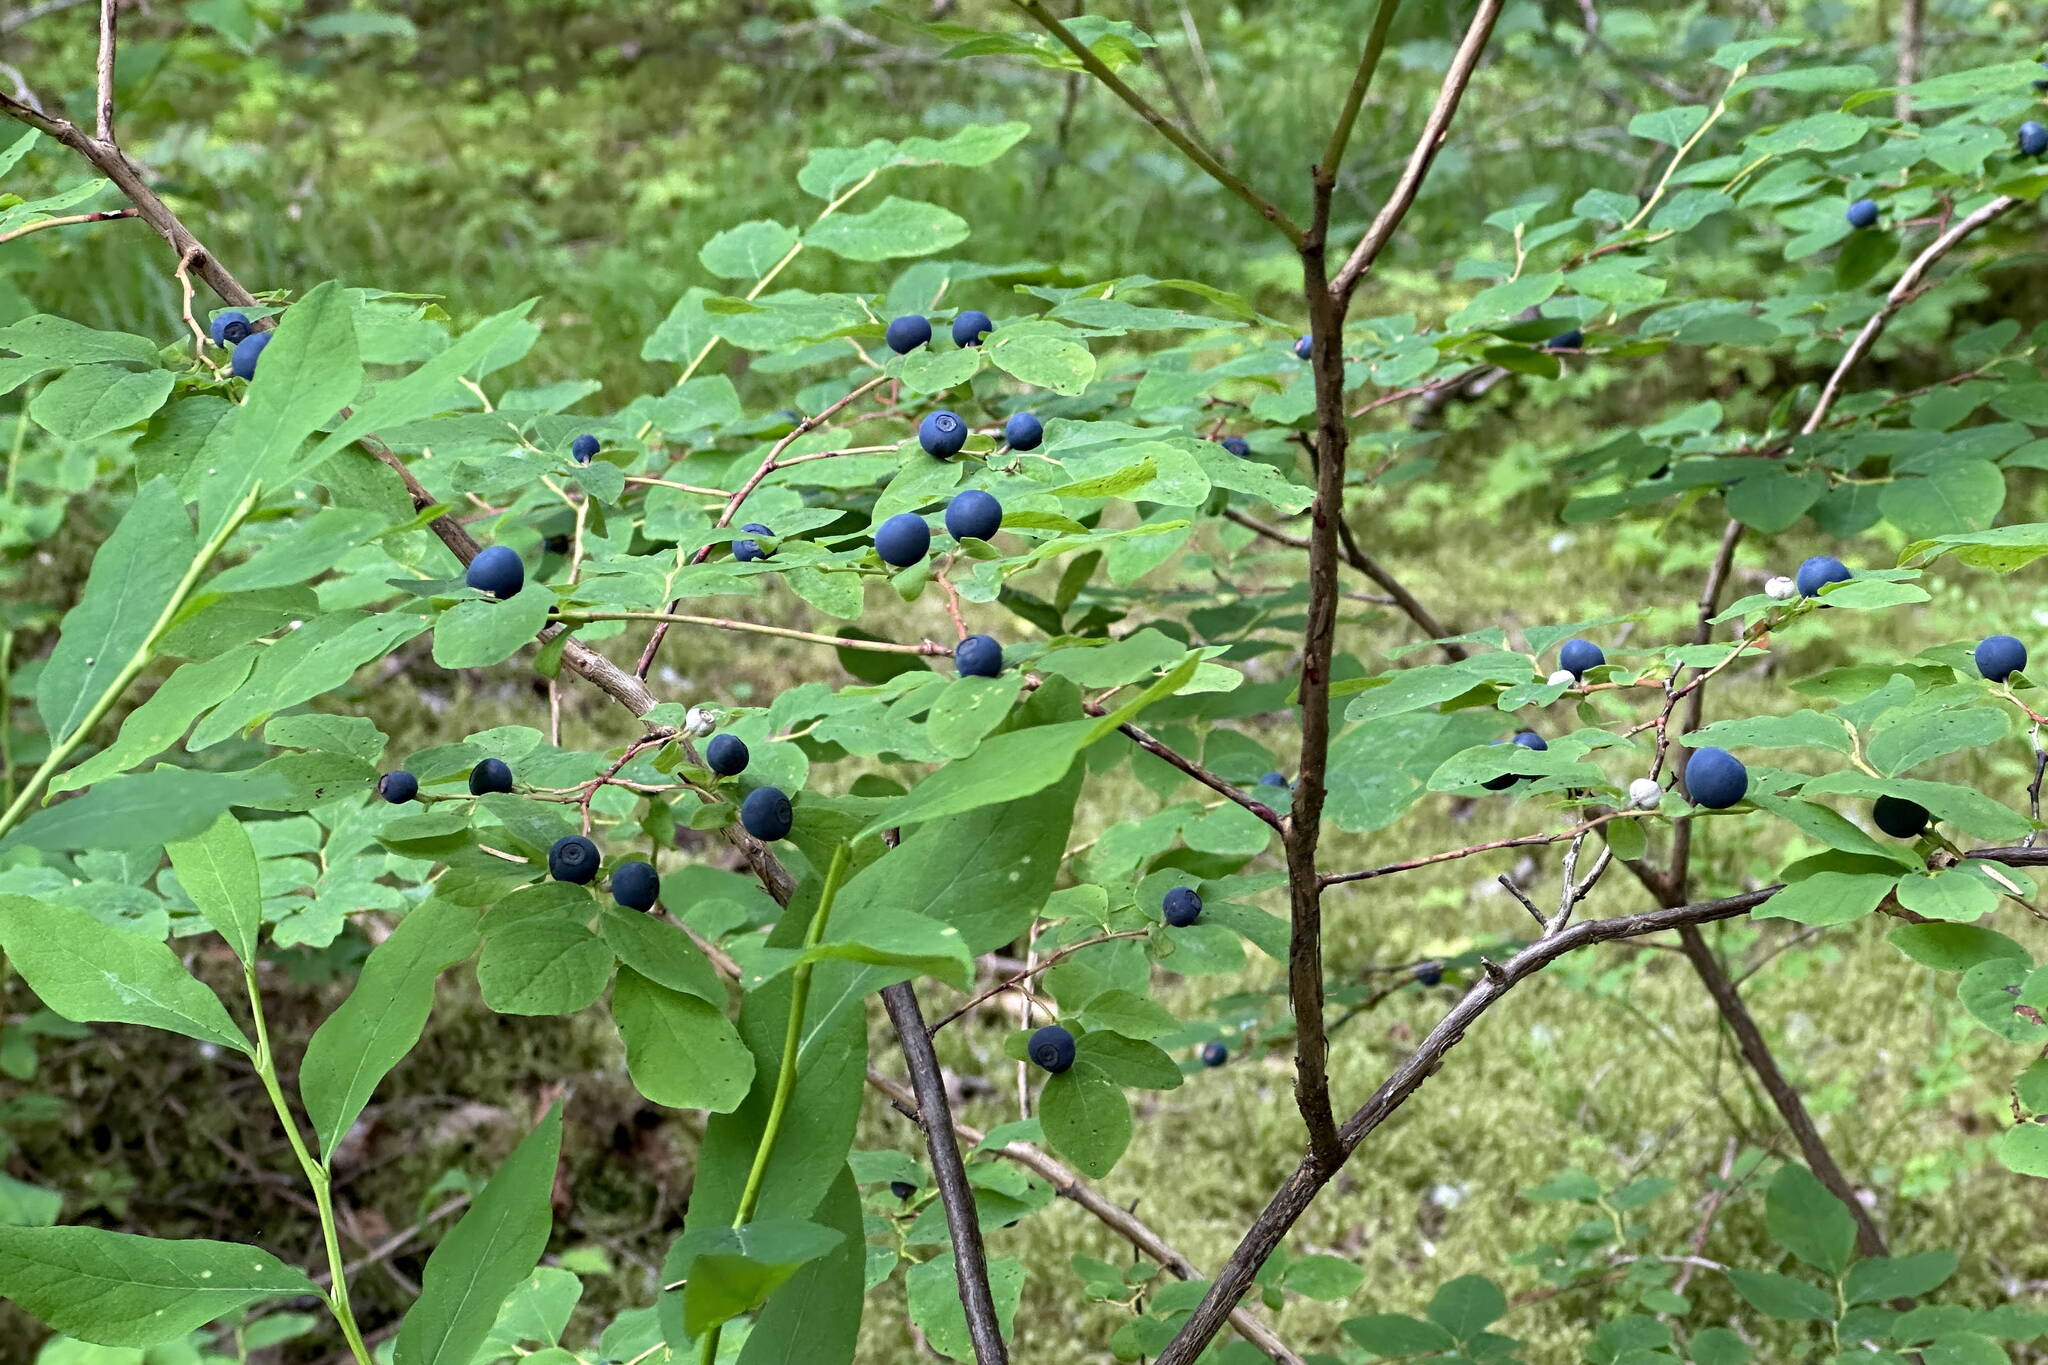 Berries along the Tolch Rock Trail on July 15. (Photo by Deana Barajas)